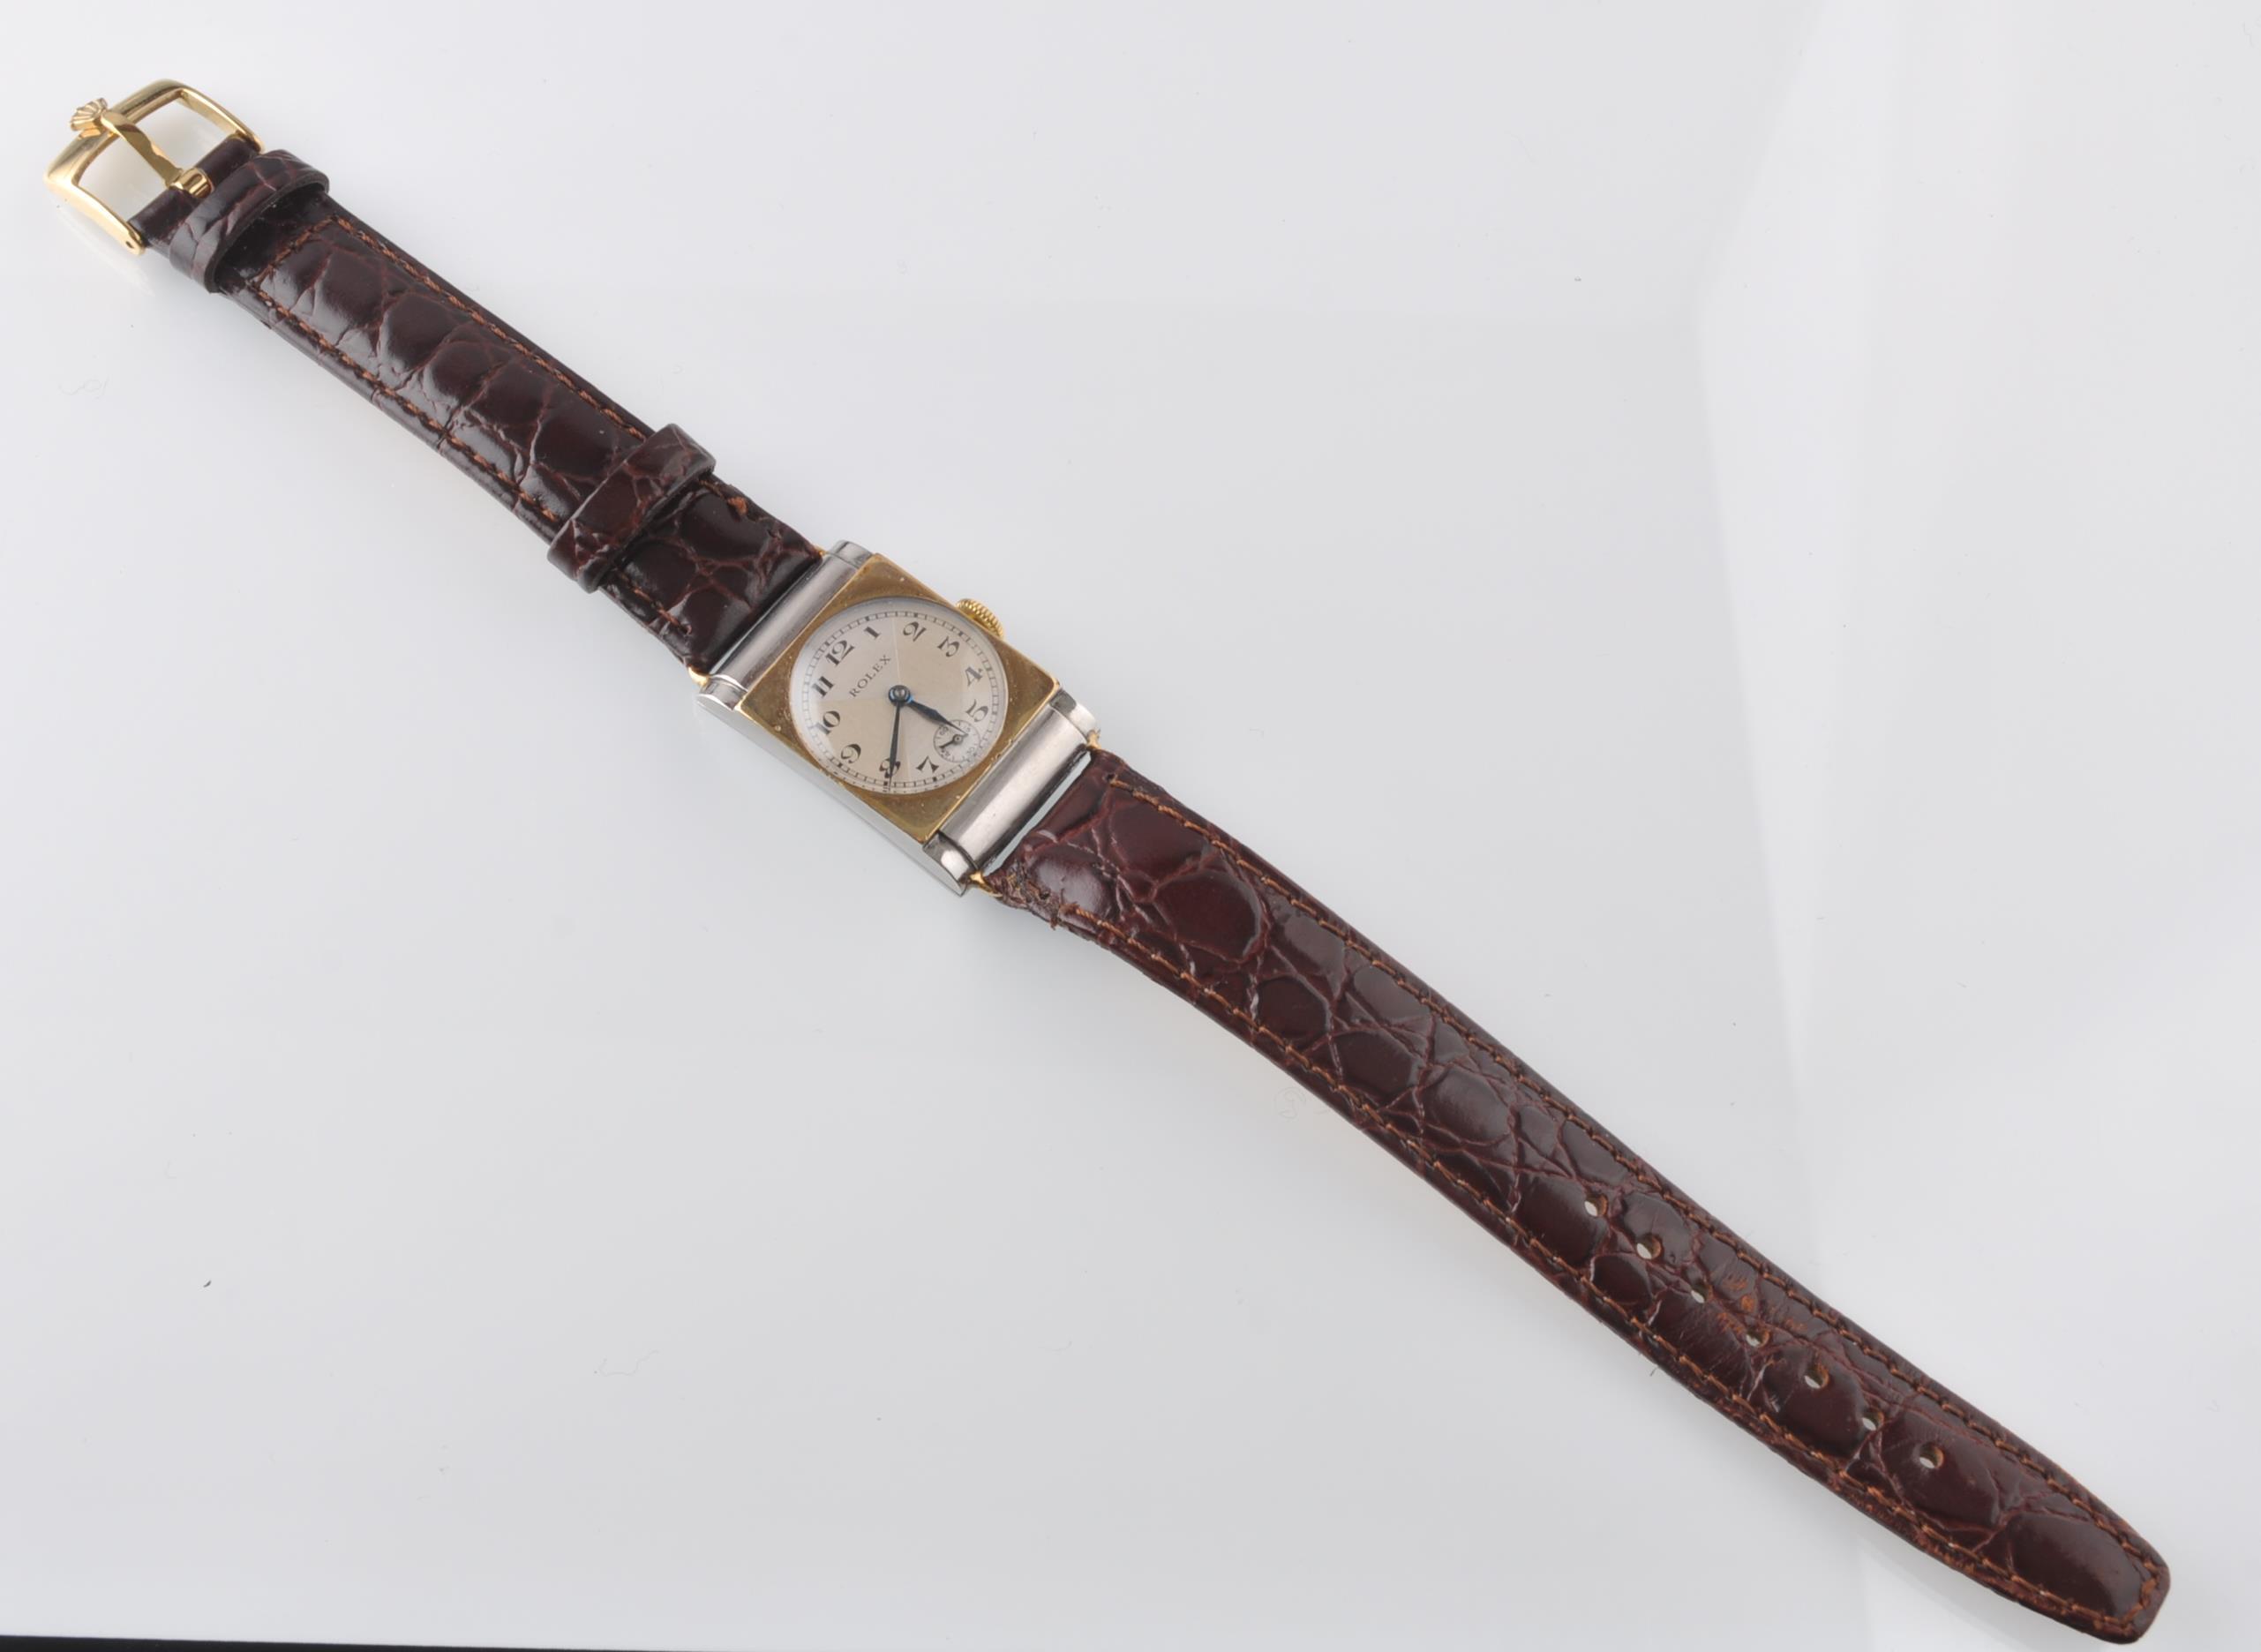 RARE ROLEX 1930'S BI COLOUR GOLD AND STEEL WRIST WATCH - Image 2 of 8